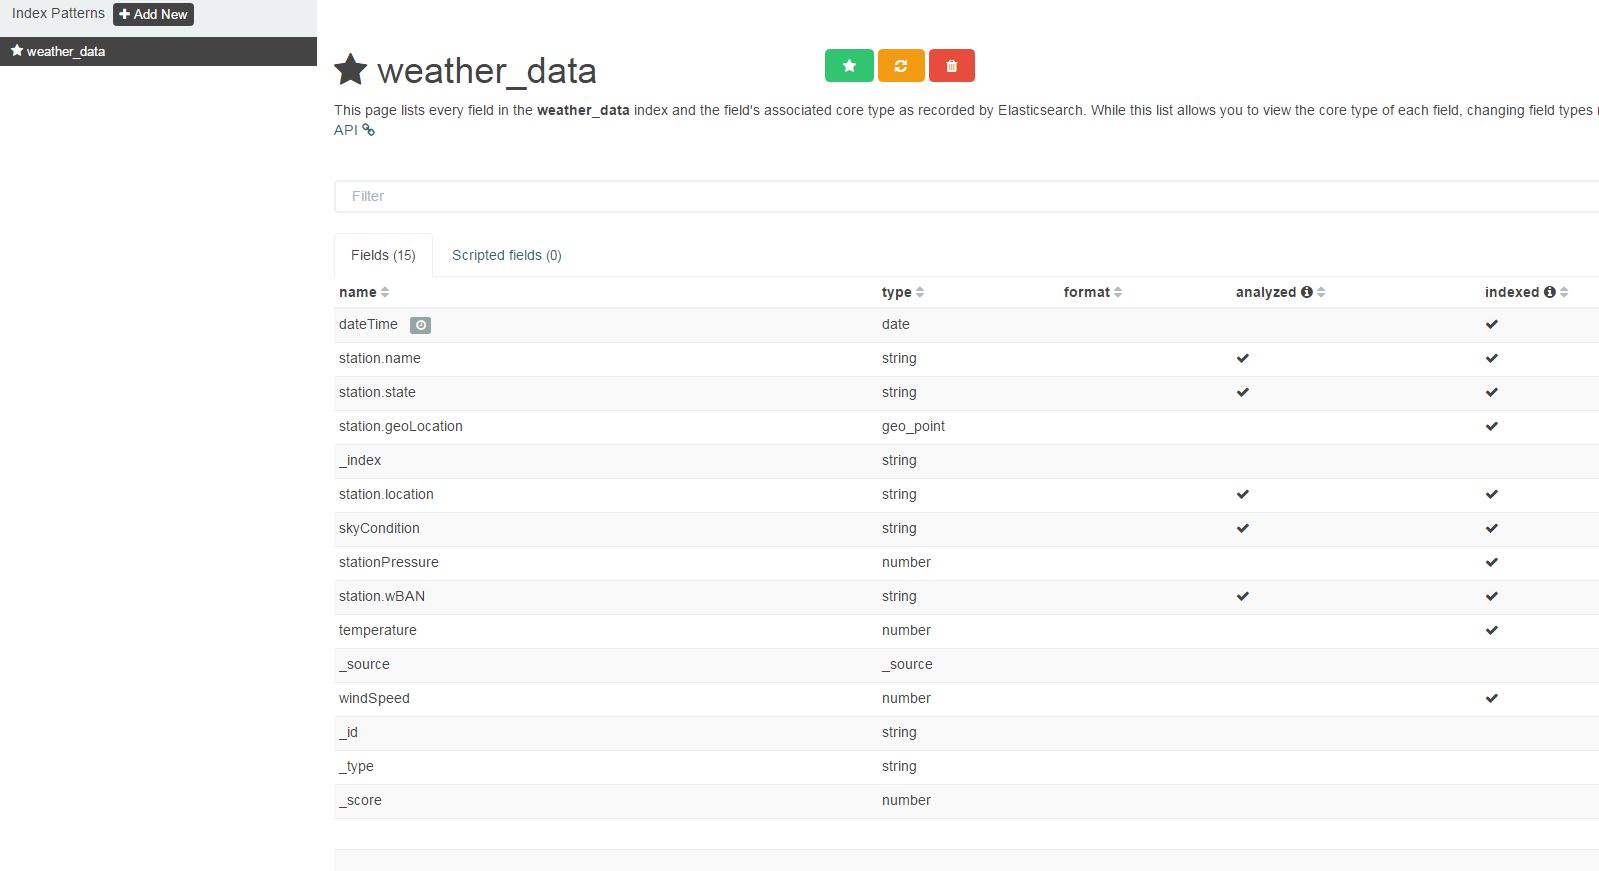 Inspecting the Weather Data Index Pattern